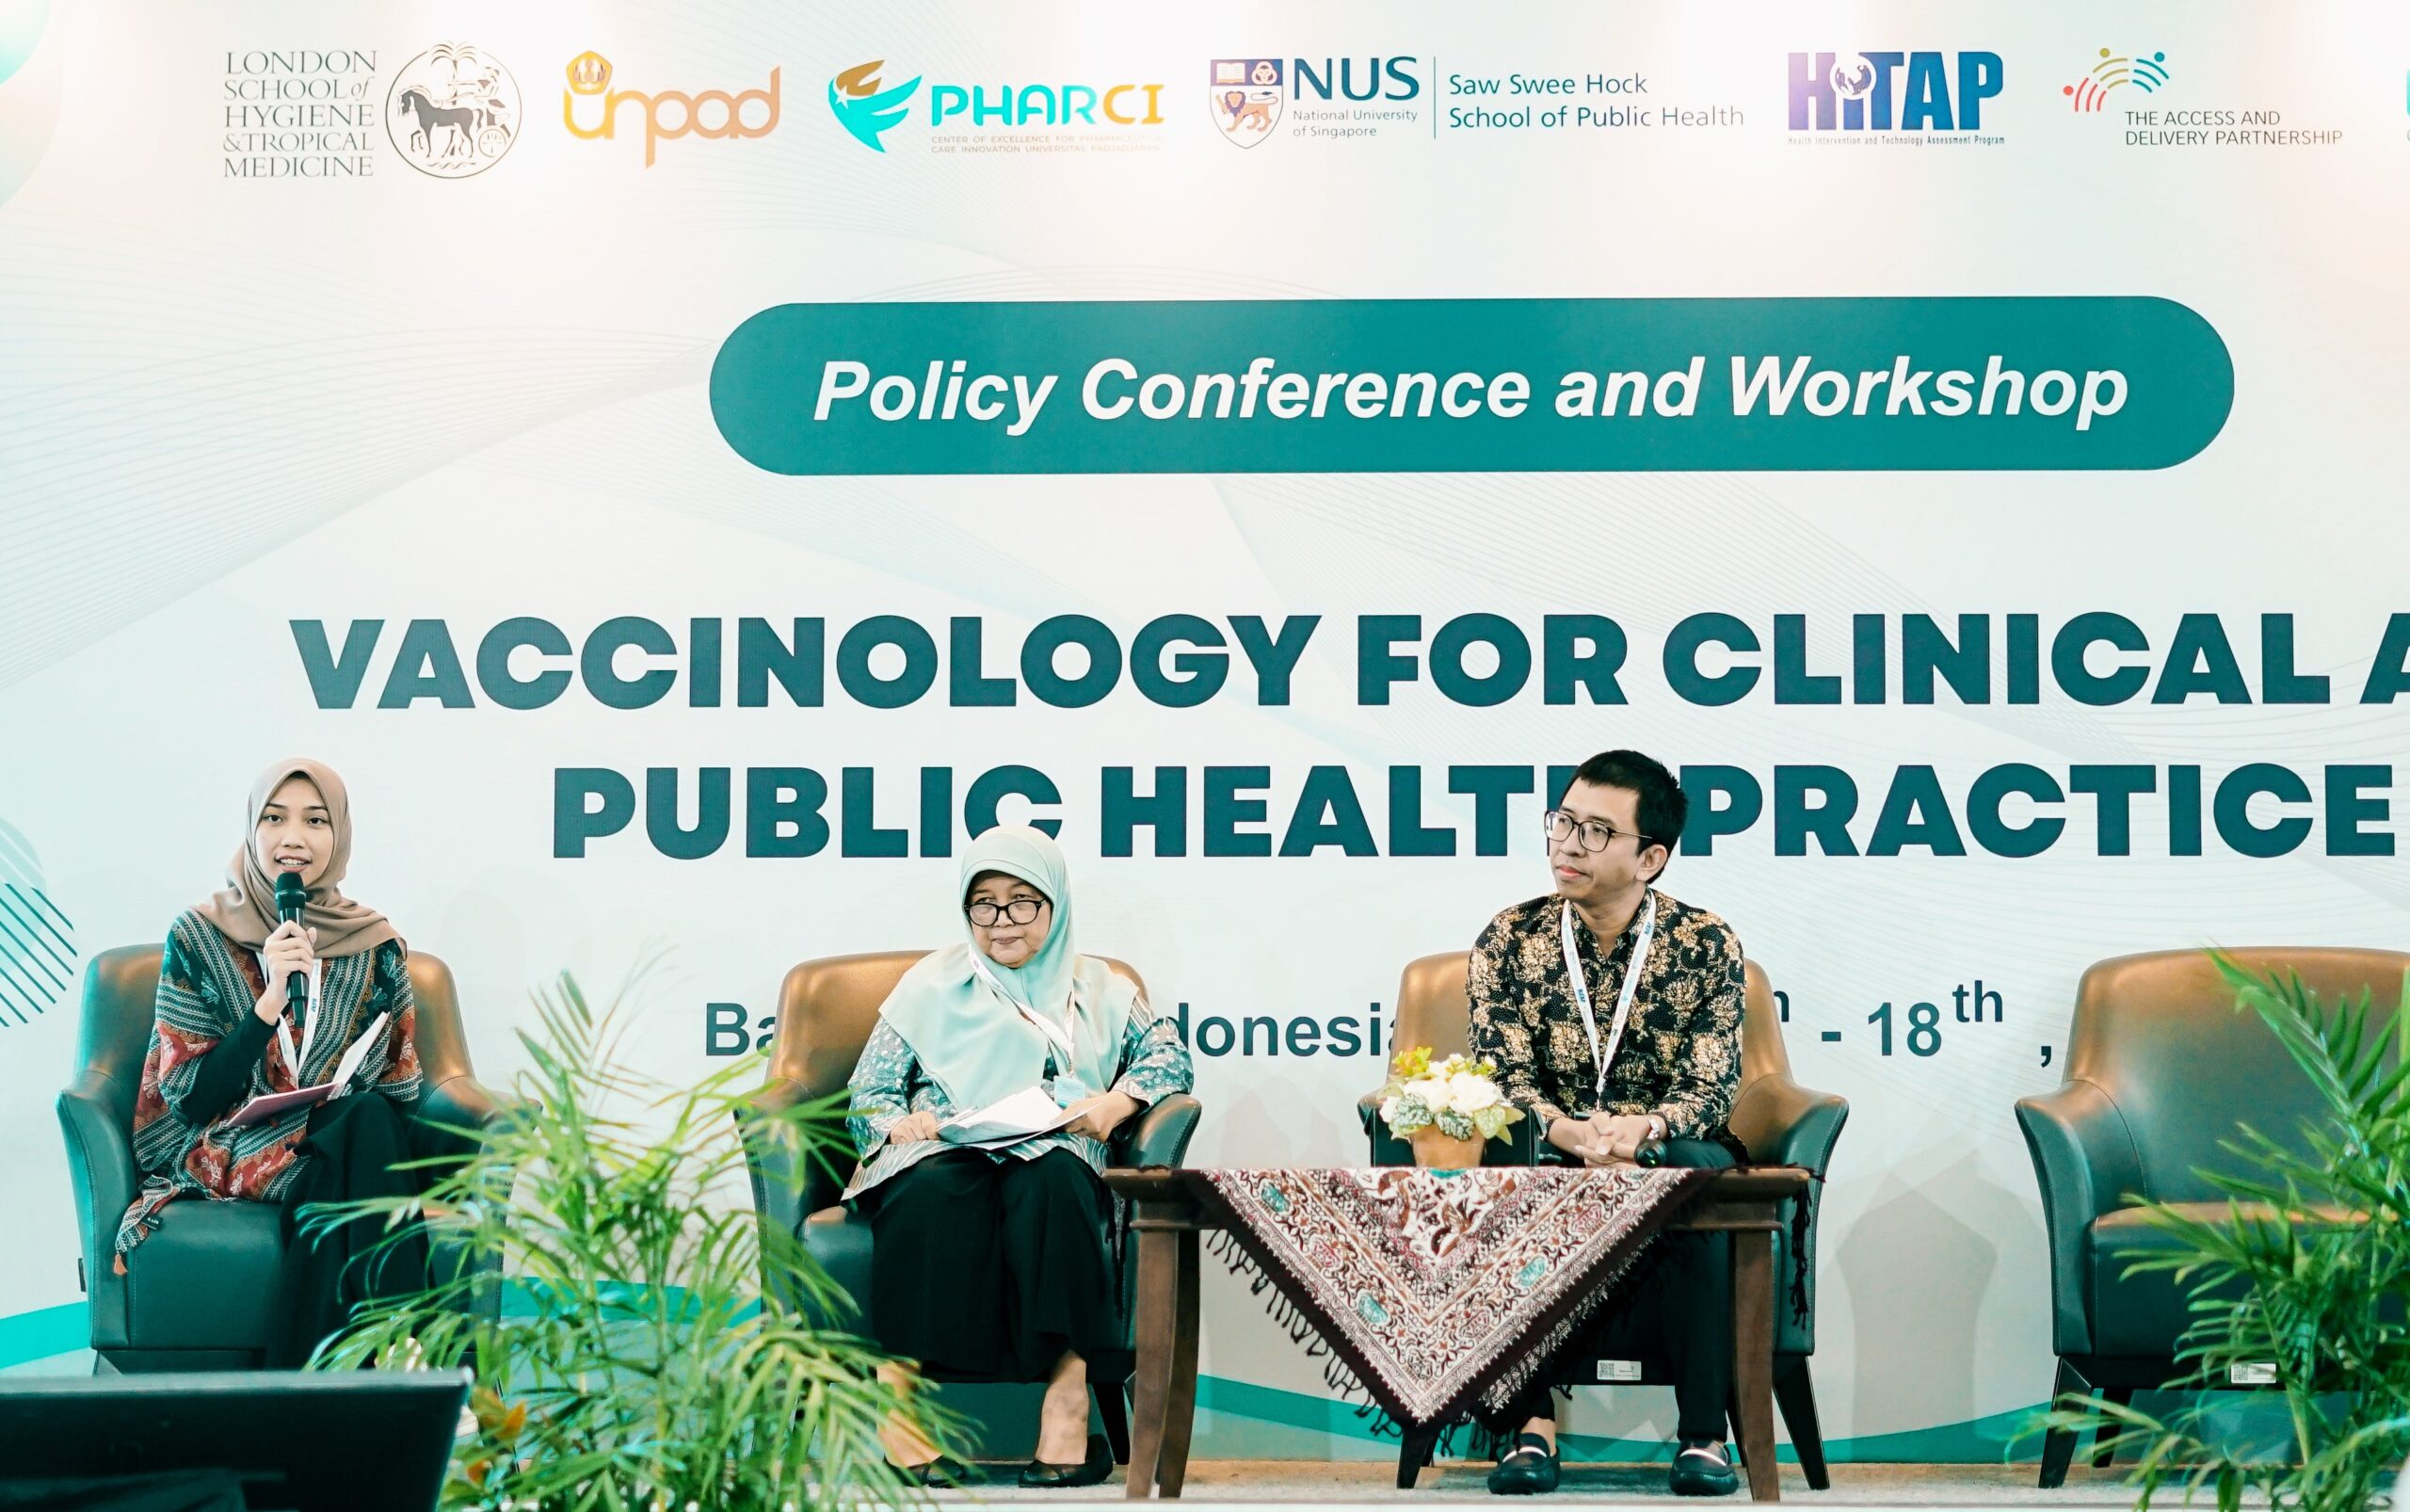 Khansa Chavarina, HITAP, Prof Mardiati Nadjib, Indonesia HTA committee, and Dr. Auliya Abdurrohim Suwantika, UNPAD, participate in a session on setting priorities for new vaccines, during the Policy Conference and Workshop on Vaccinology for Clinical and Public Health Practice in Bandung, Indonesia. Photo: HITAP